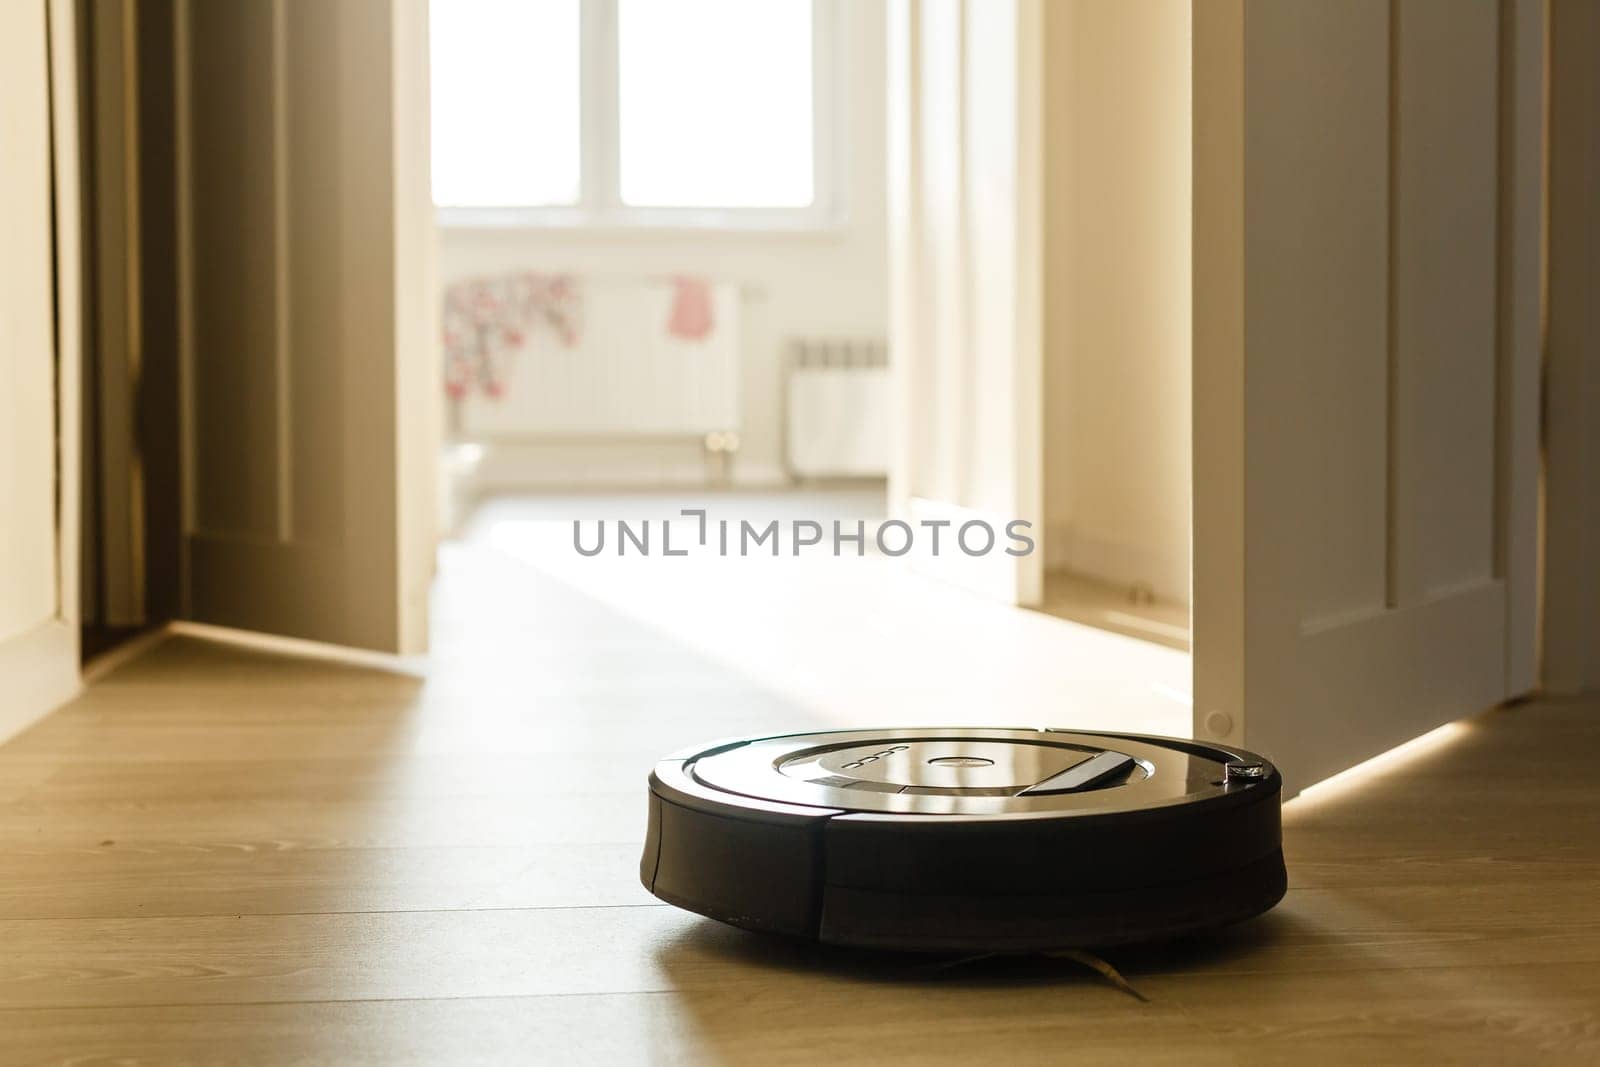 Robotic vacuum cleaner on laminate wood floor smart cleaning technology. Selective focus.